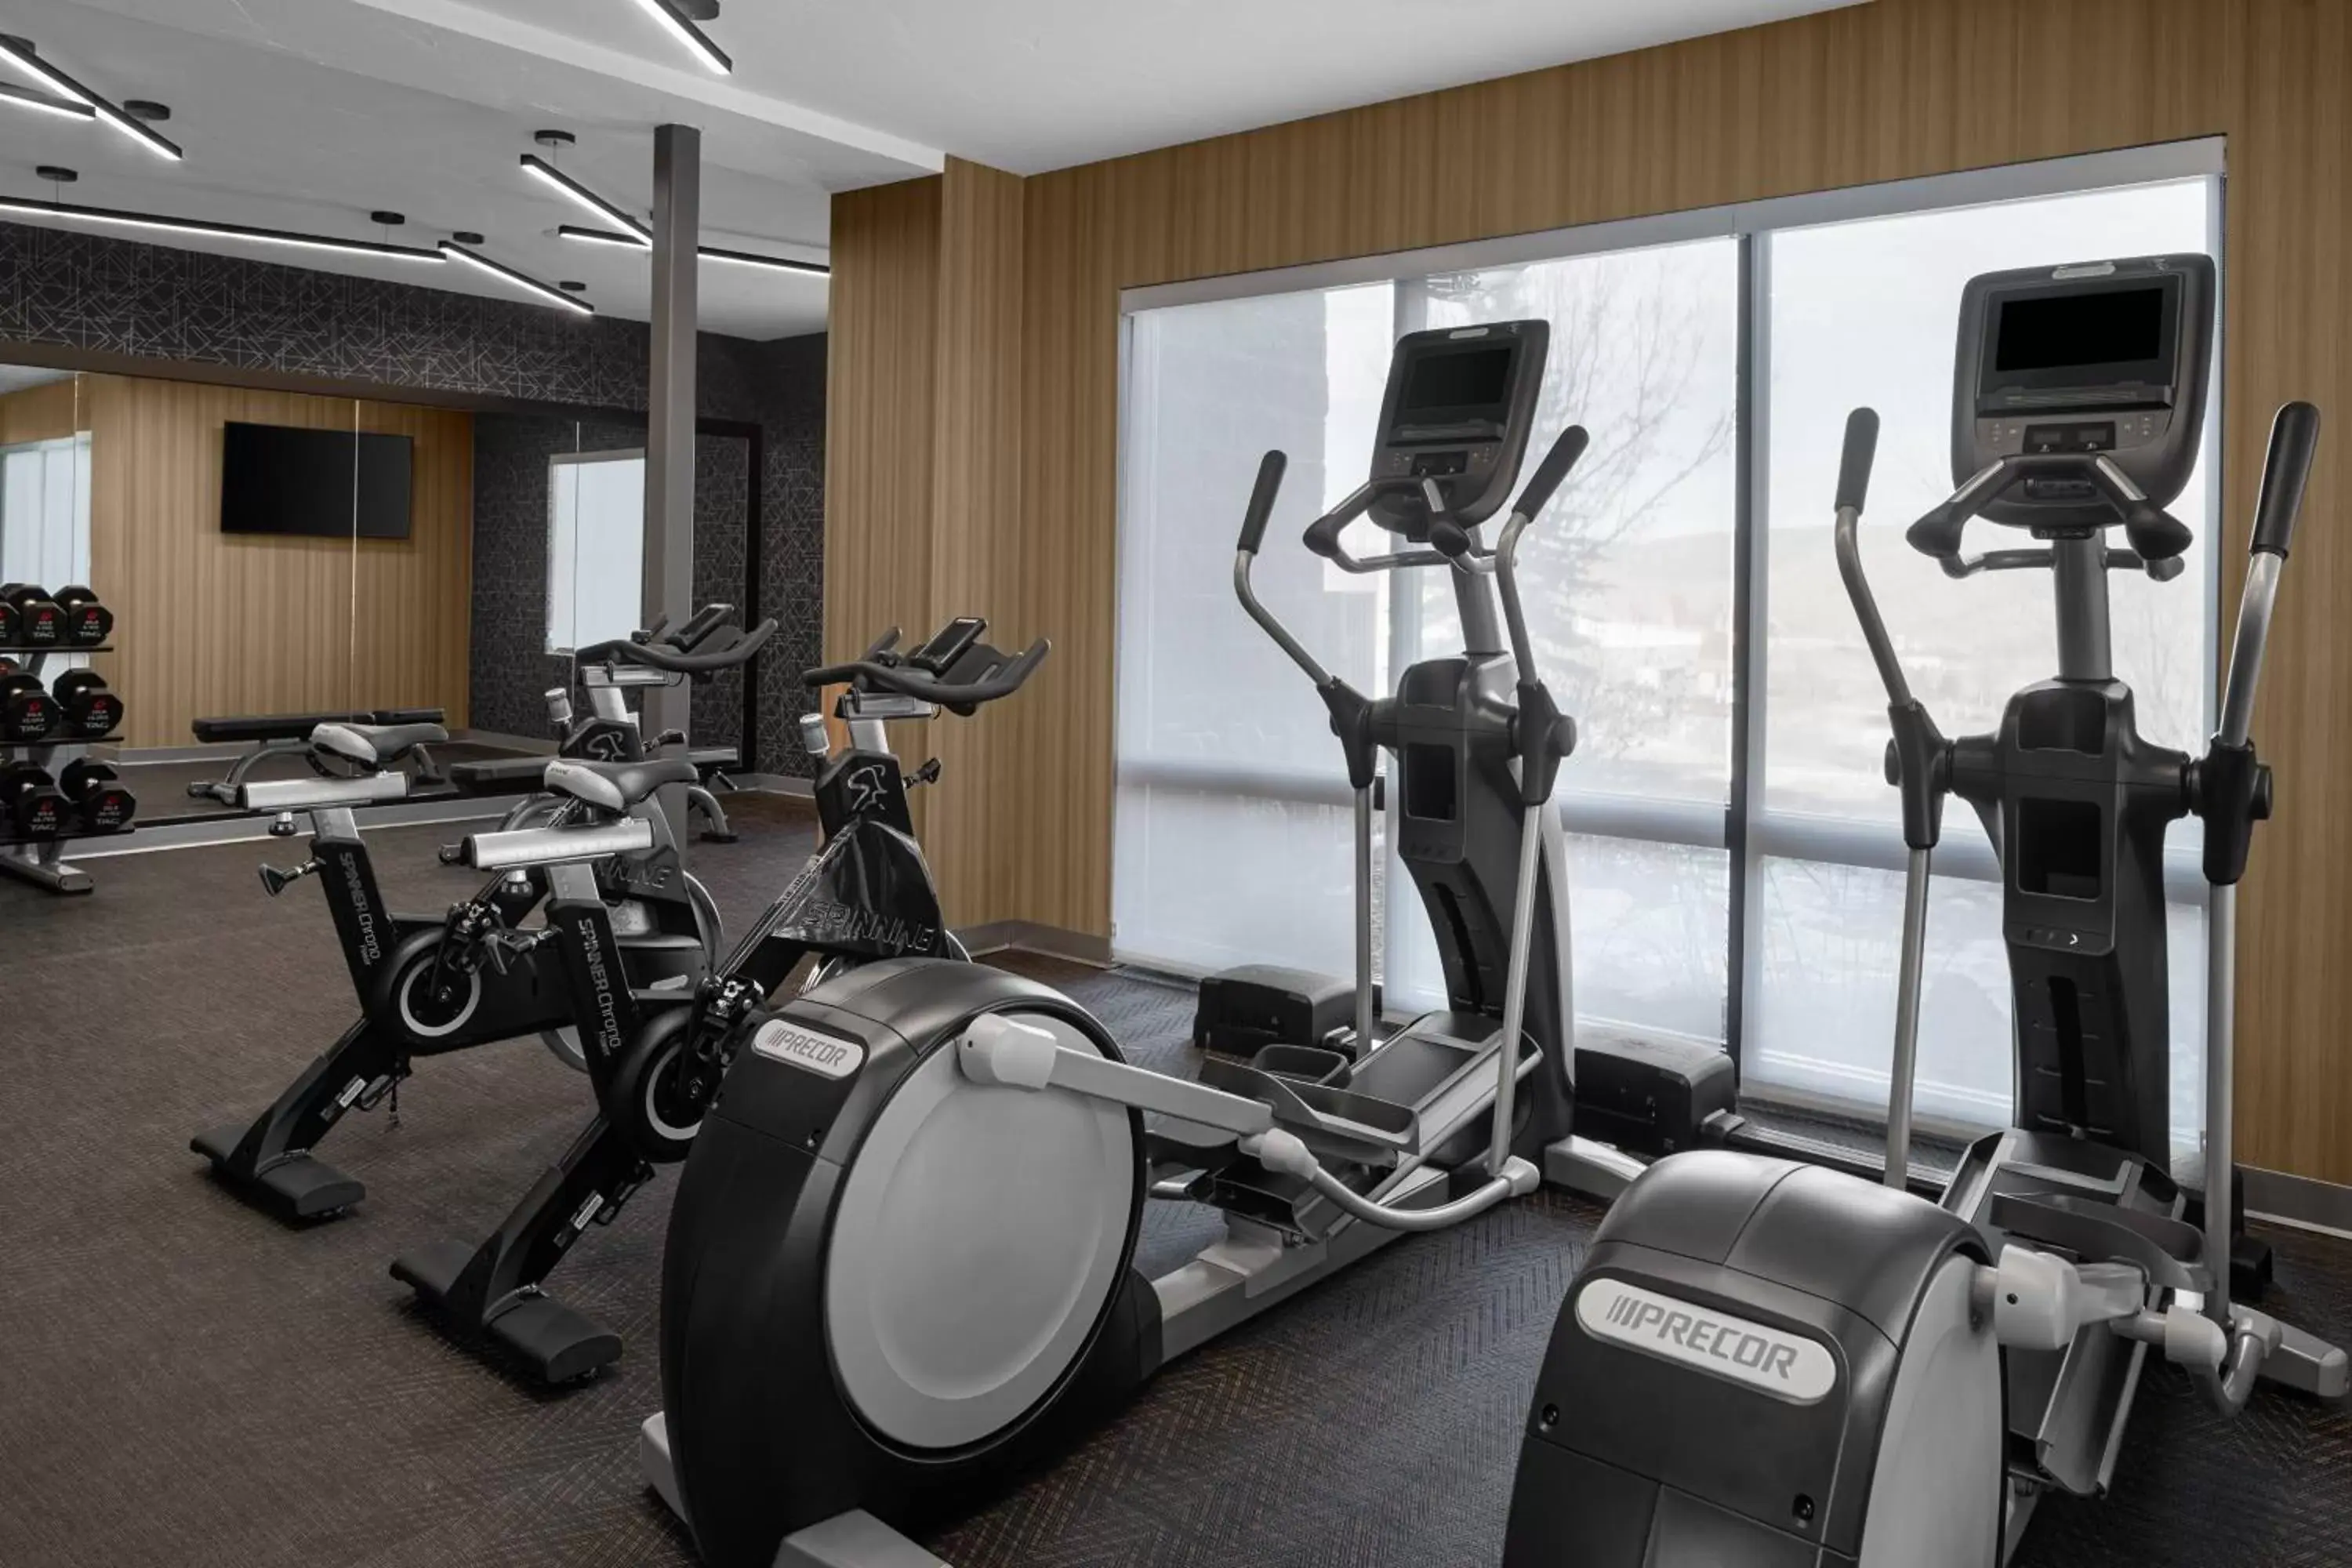 Fitness centre/facilities, Fitness Center/Facilities in AC Hotel Park City